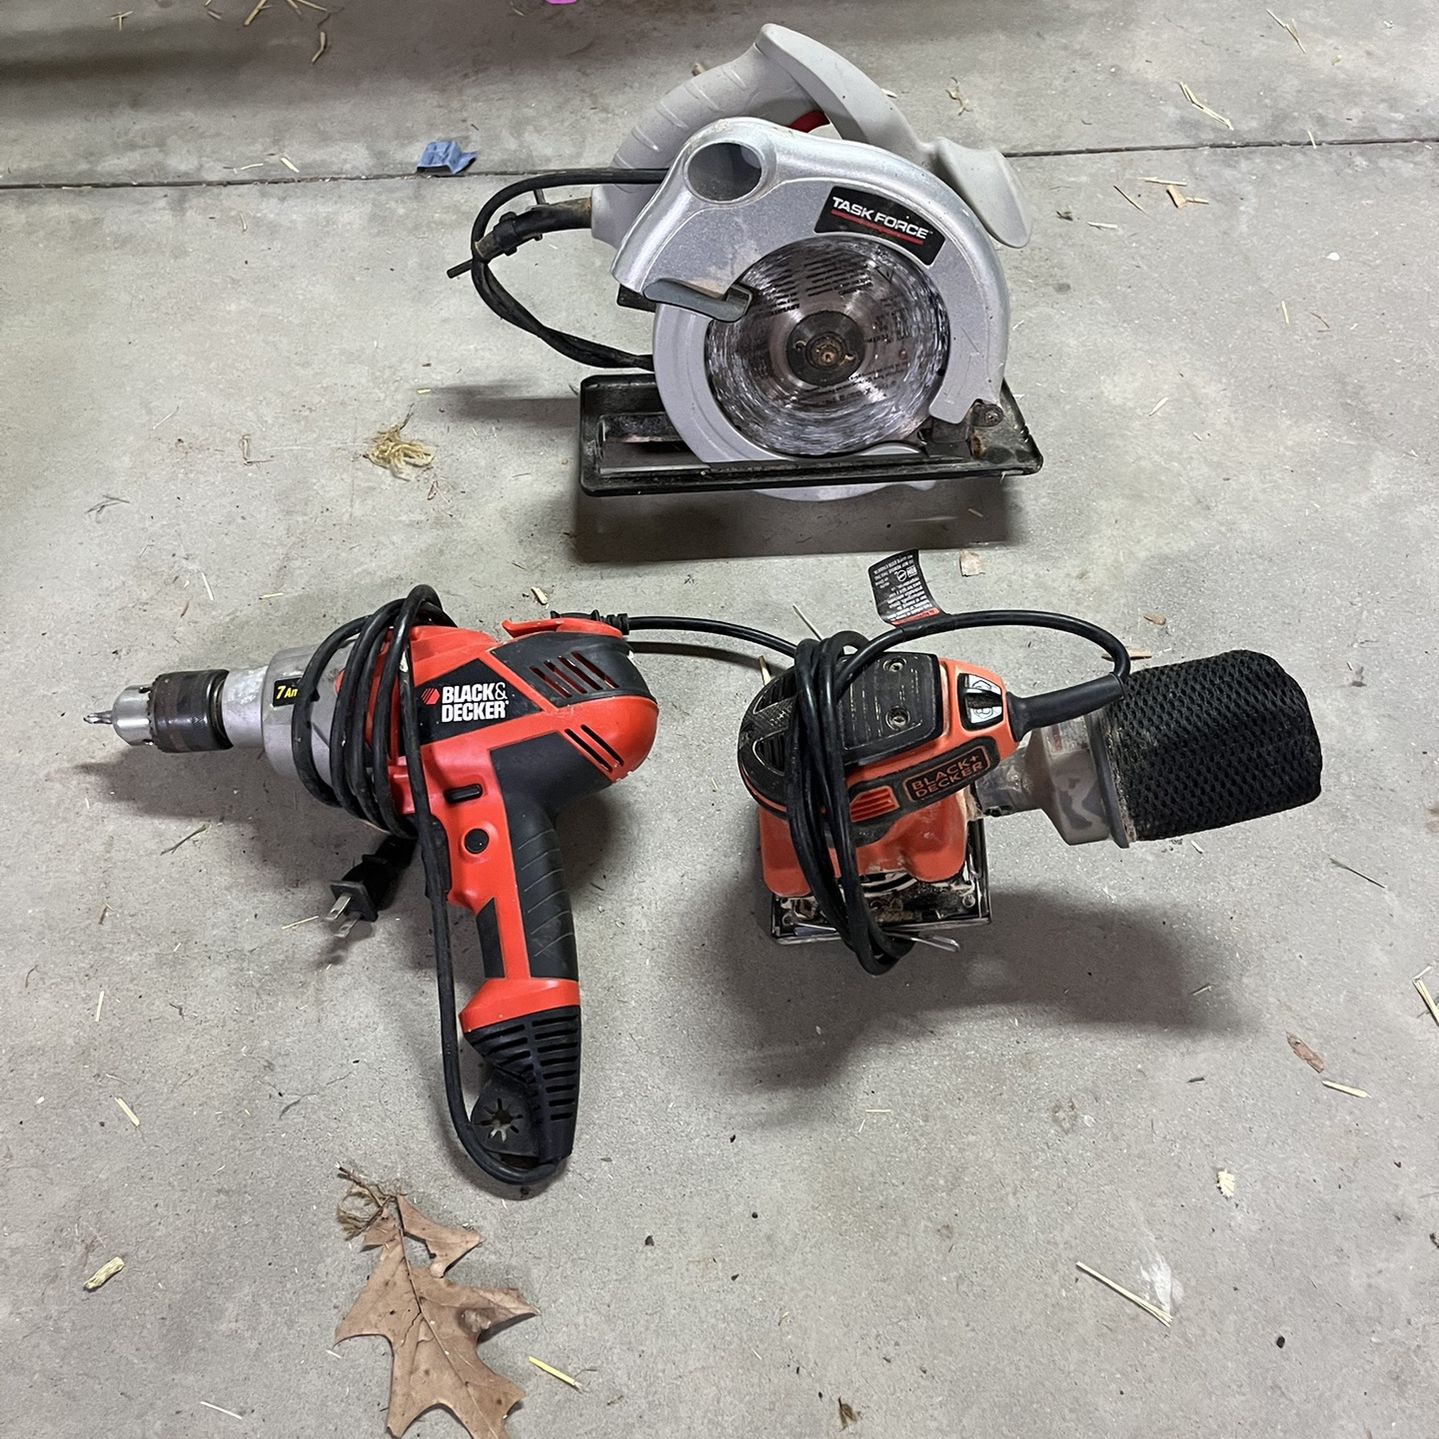 Set of 3 Power Tools - Sander, Skill Saw, and Drill